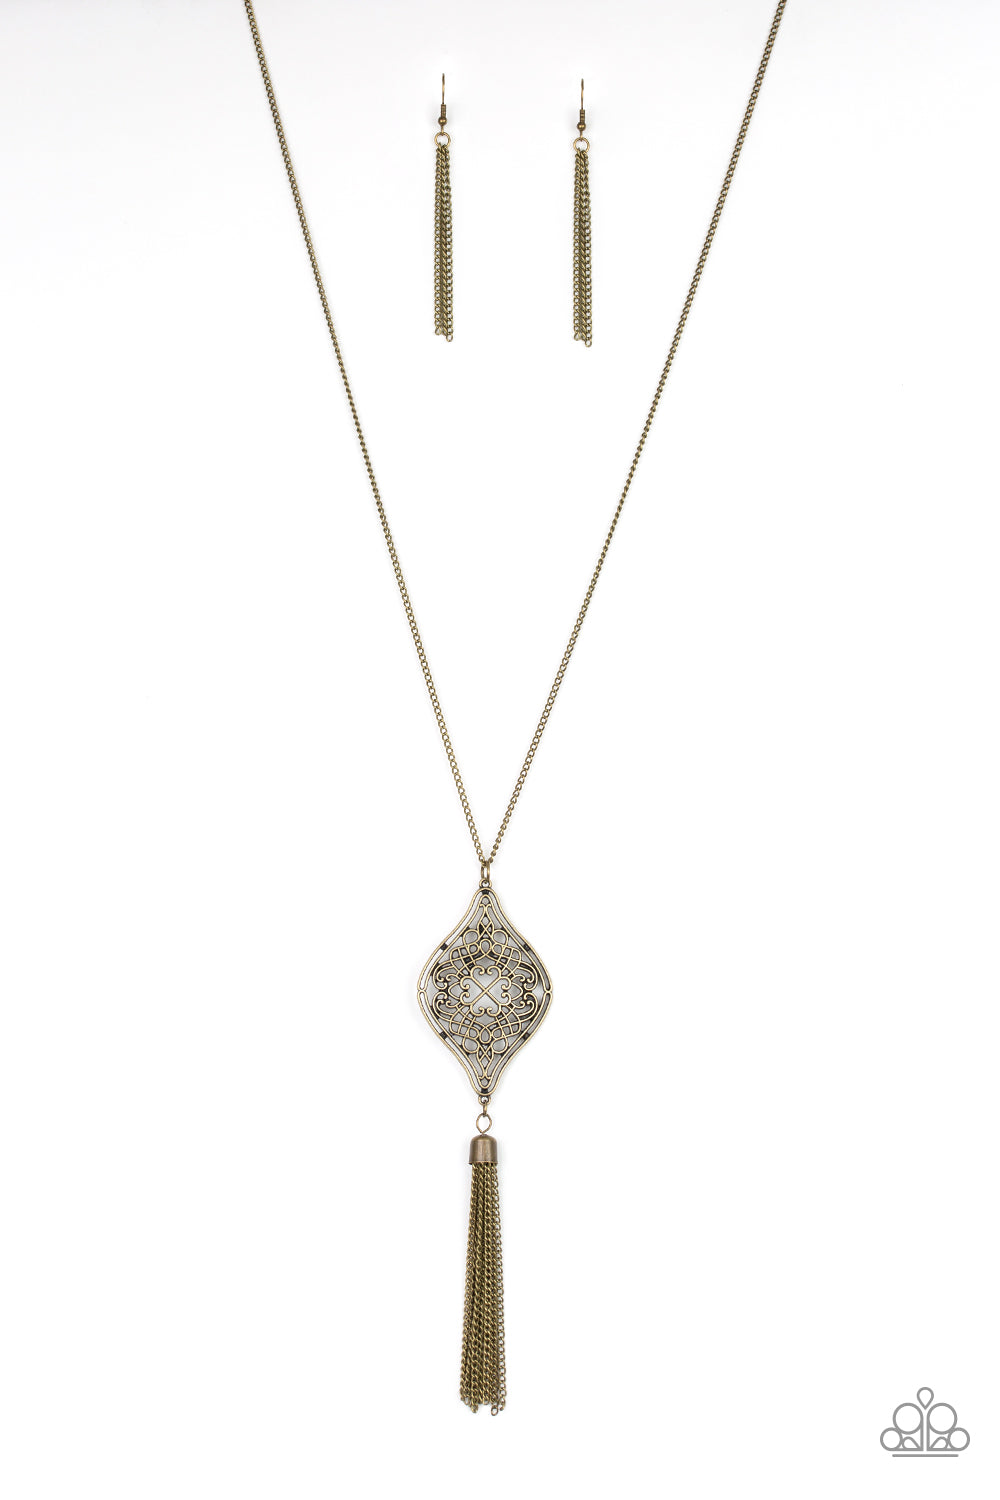 Paparazzi - Totally Worth the TASSEL - Brass Necklace